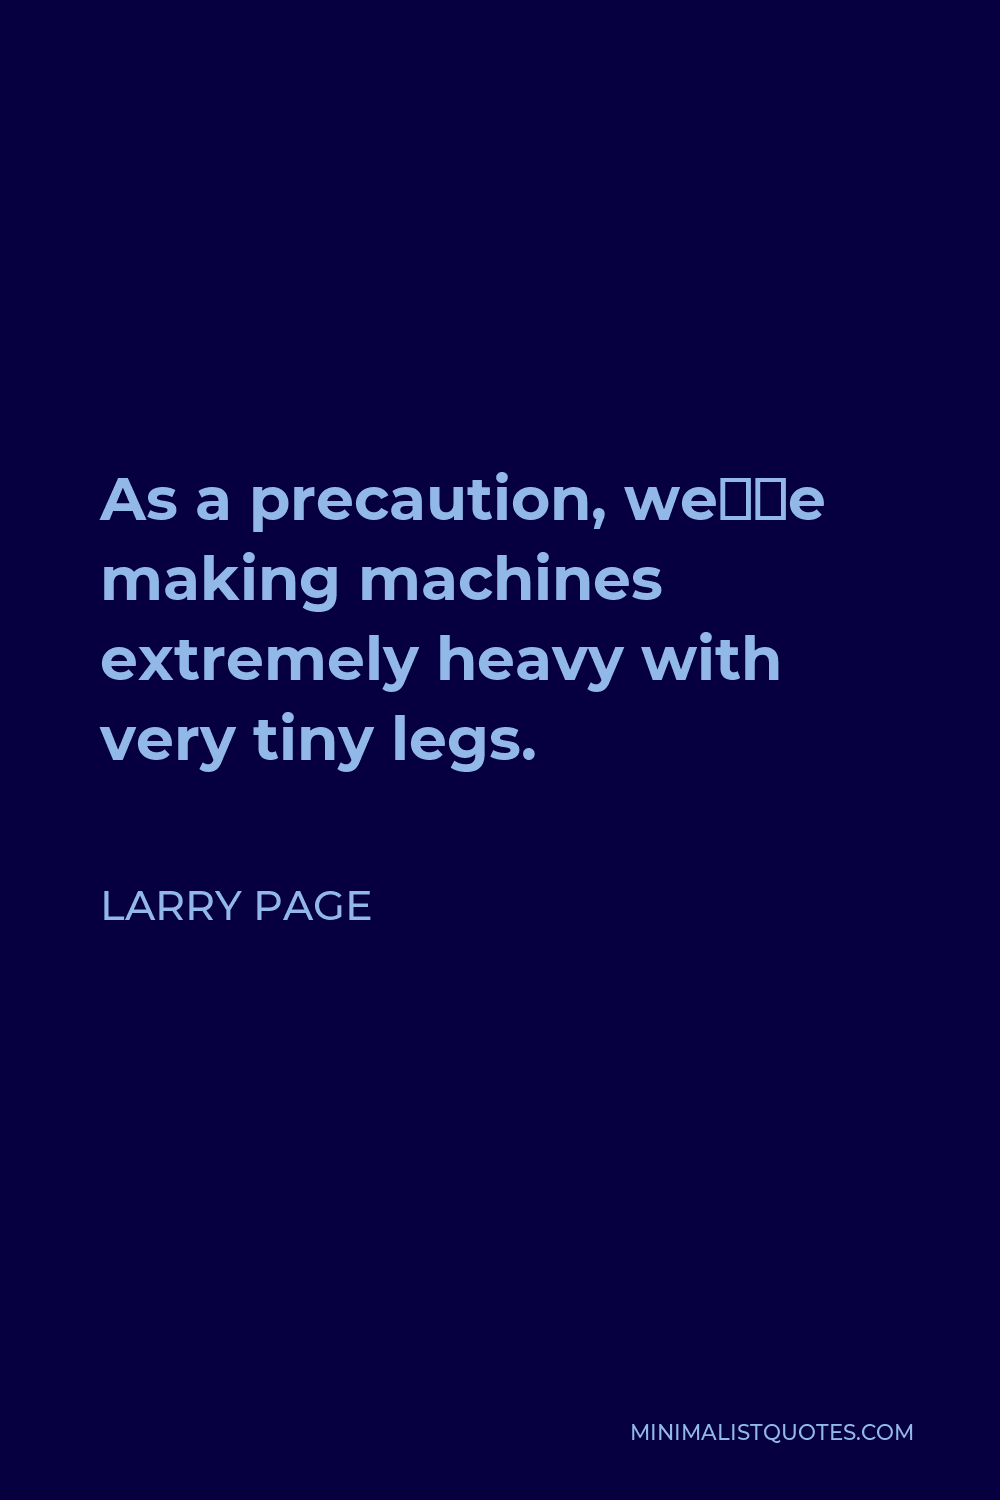 Larry Page Quote - As a precaution, we’re making machines extremely heavy with very tiny legs.